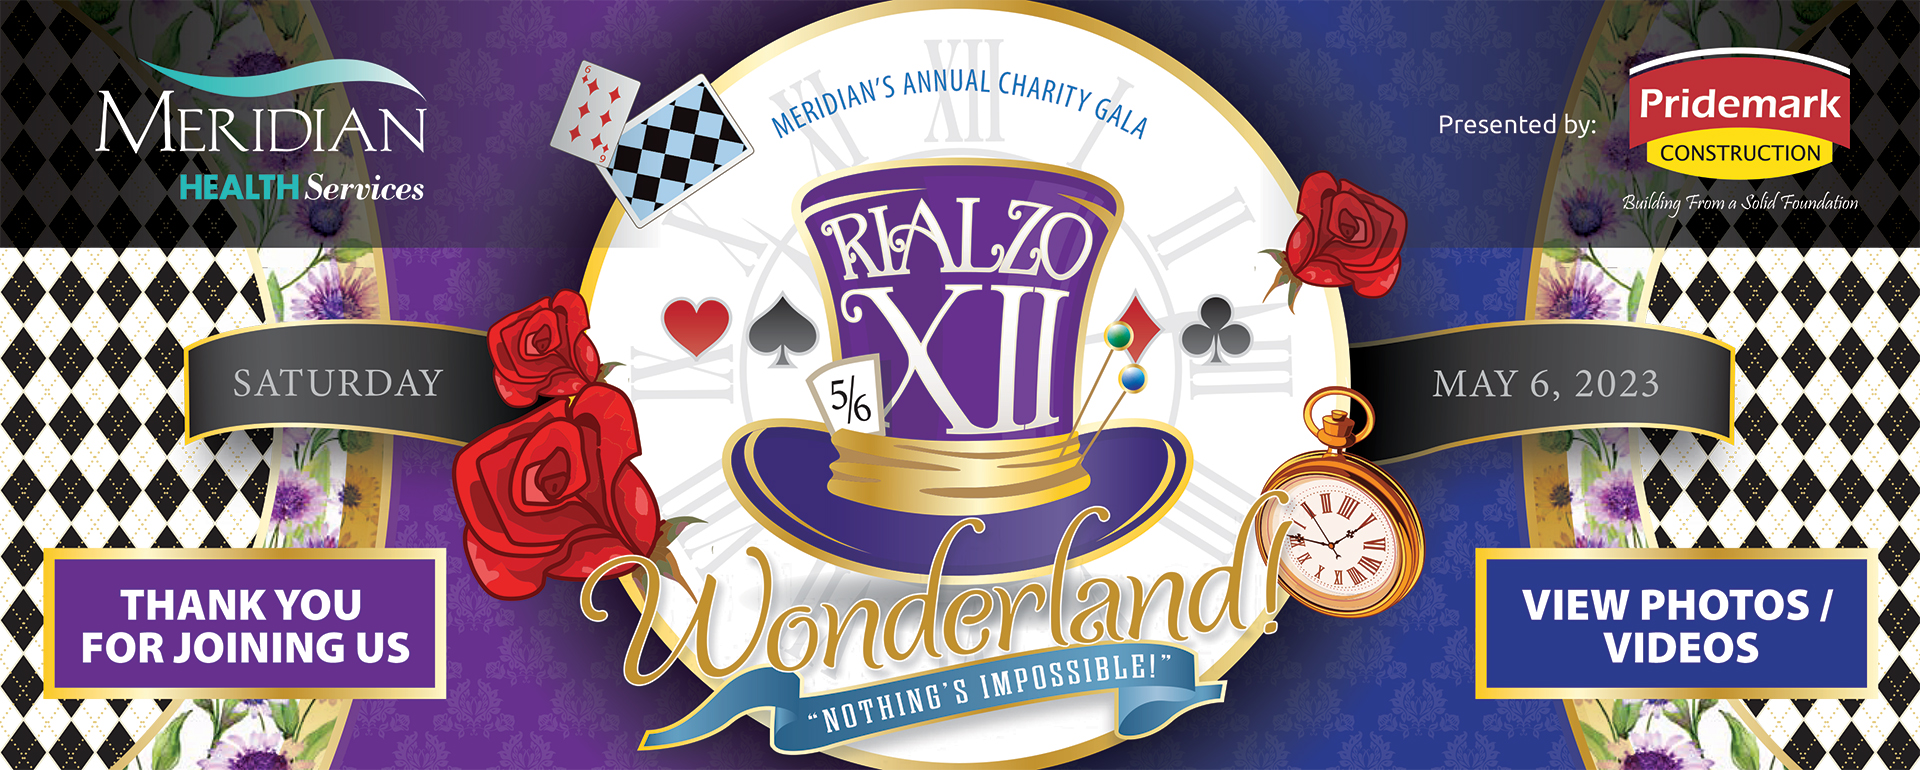 Rialzo XII Banner